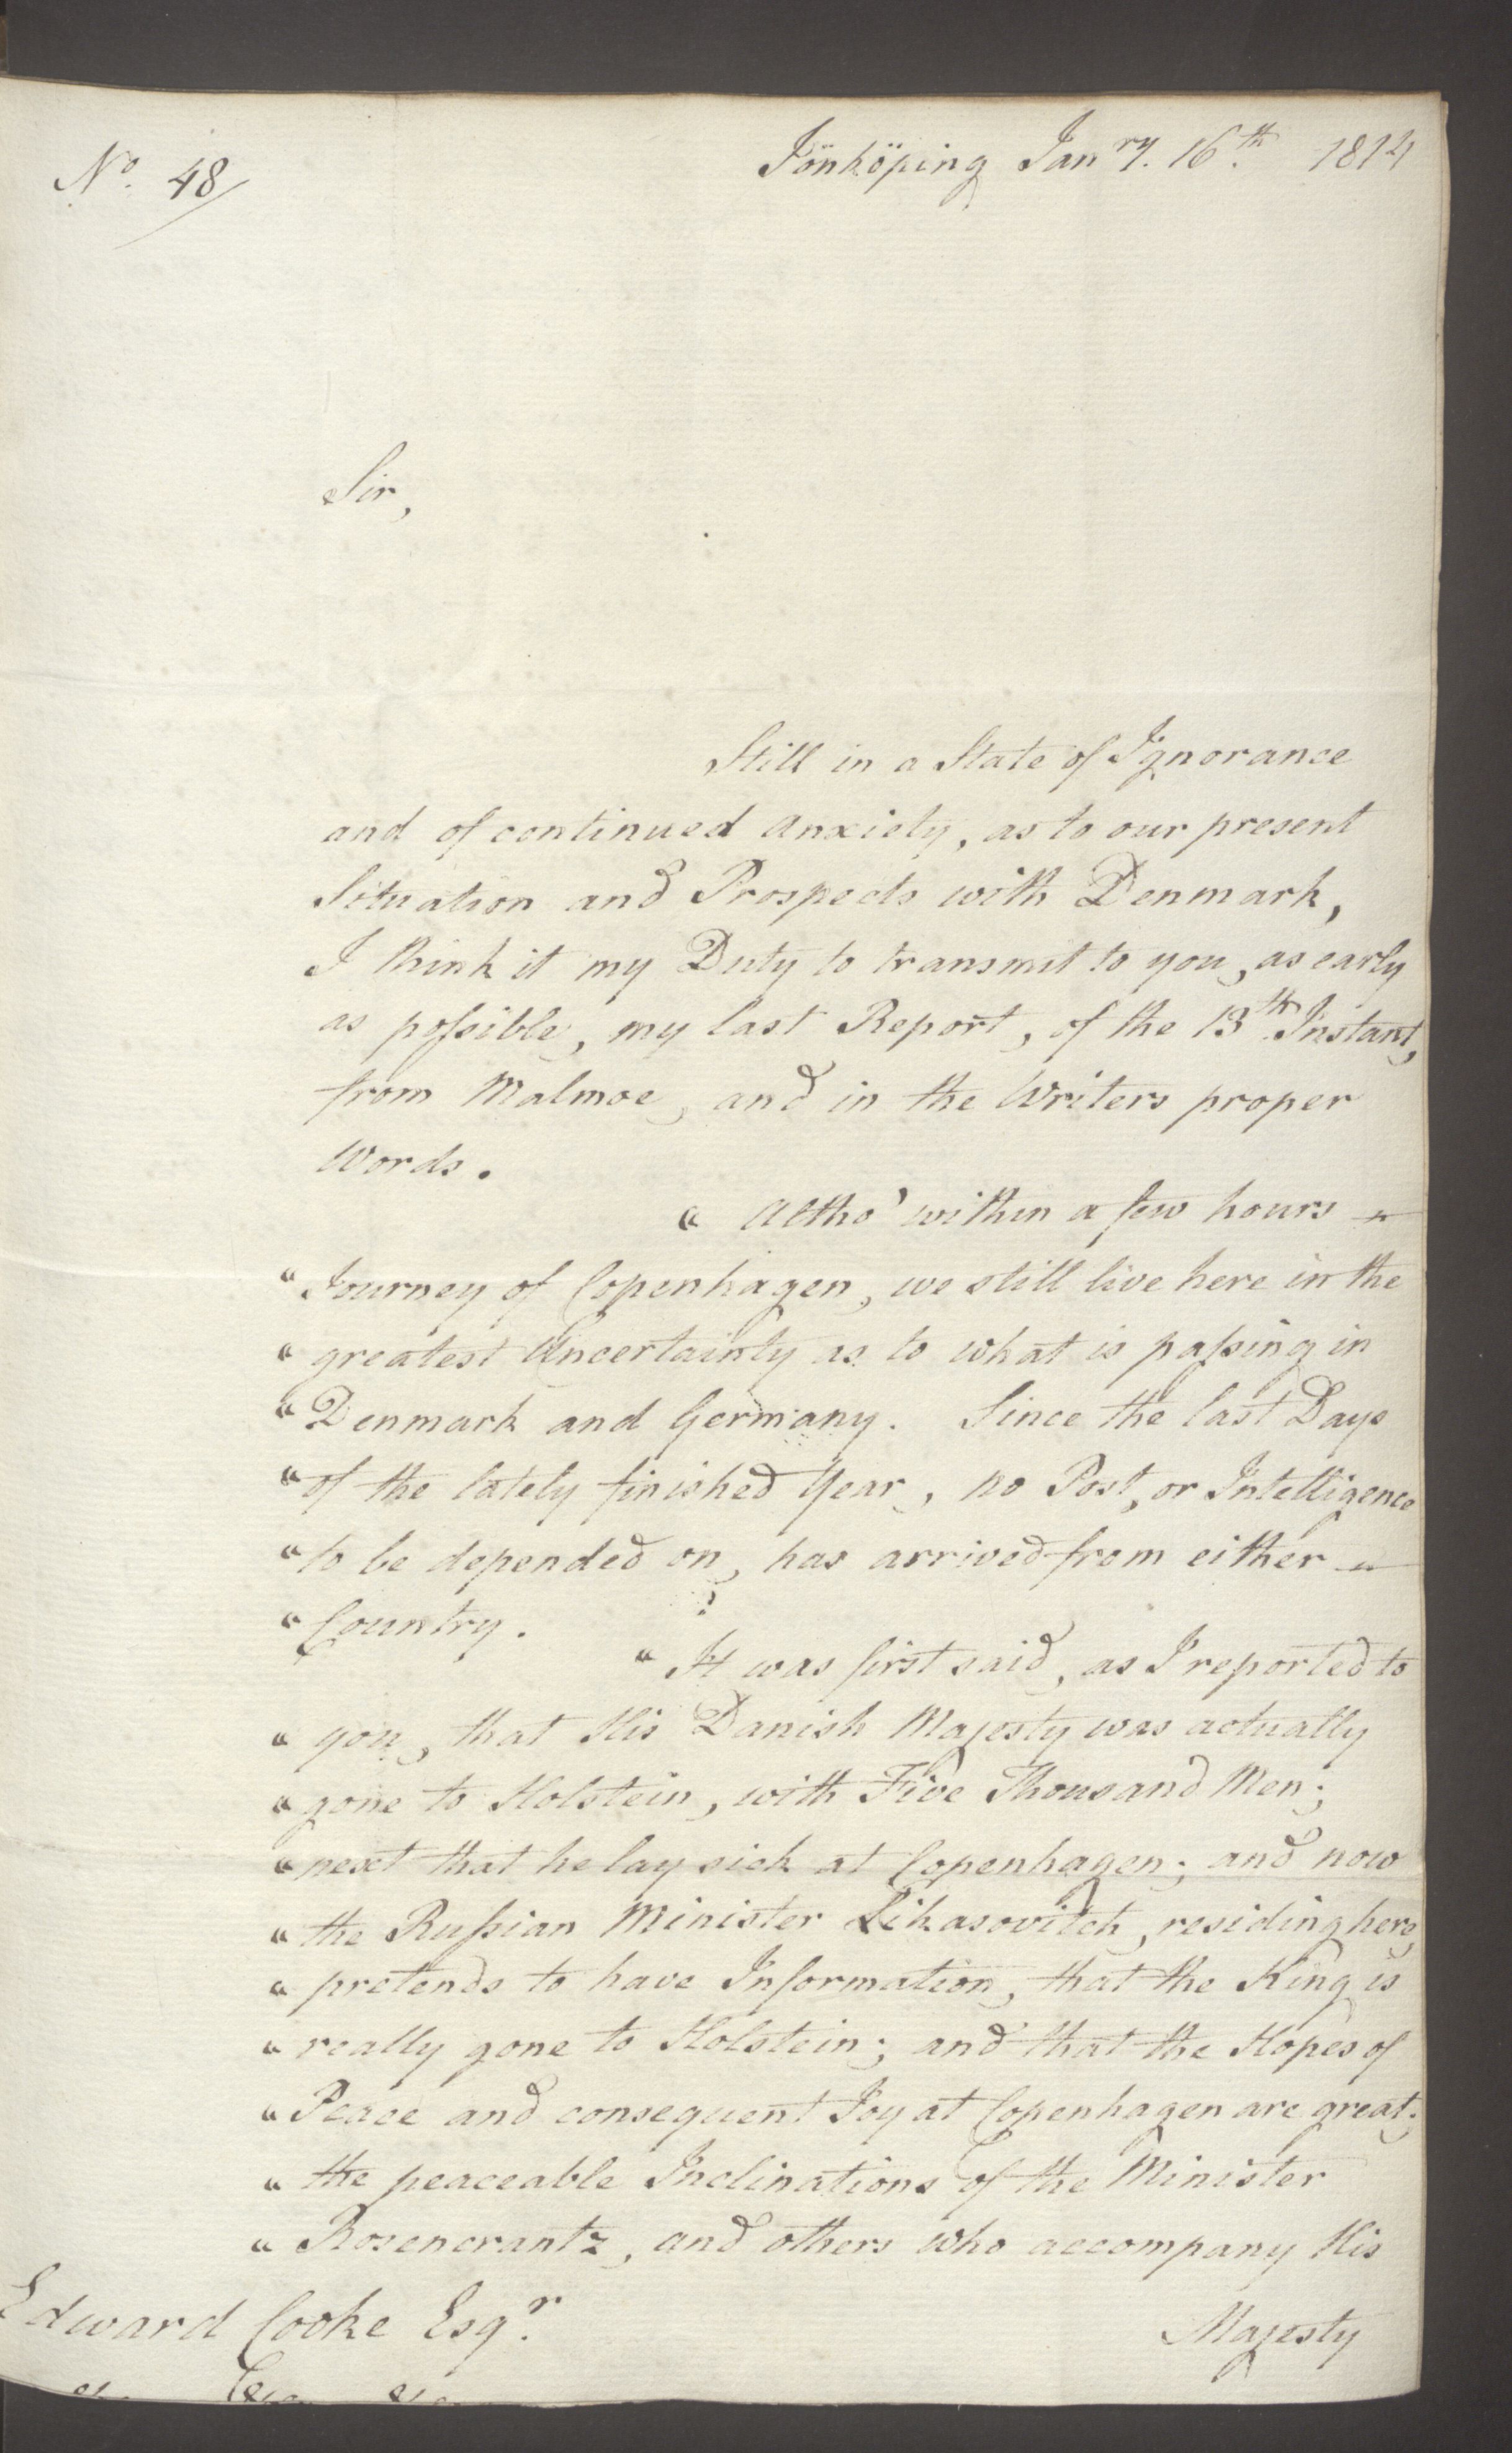 Foreign Office*, UKA/-/FO 38/16: Sir C. Gordon. Reports from Malmö, Jonkoping, and Helsingborg, 1814, p. 7